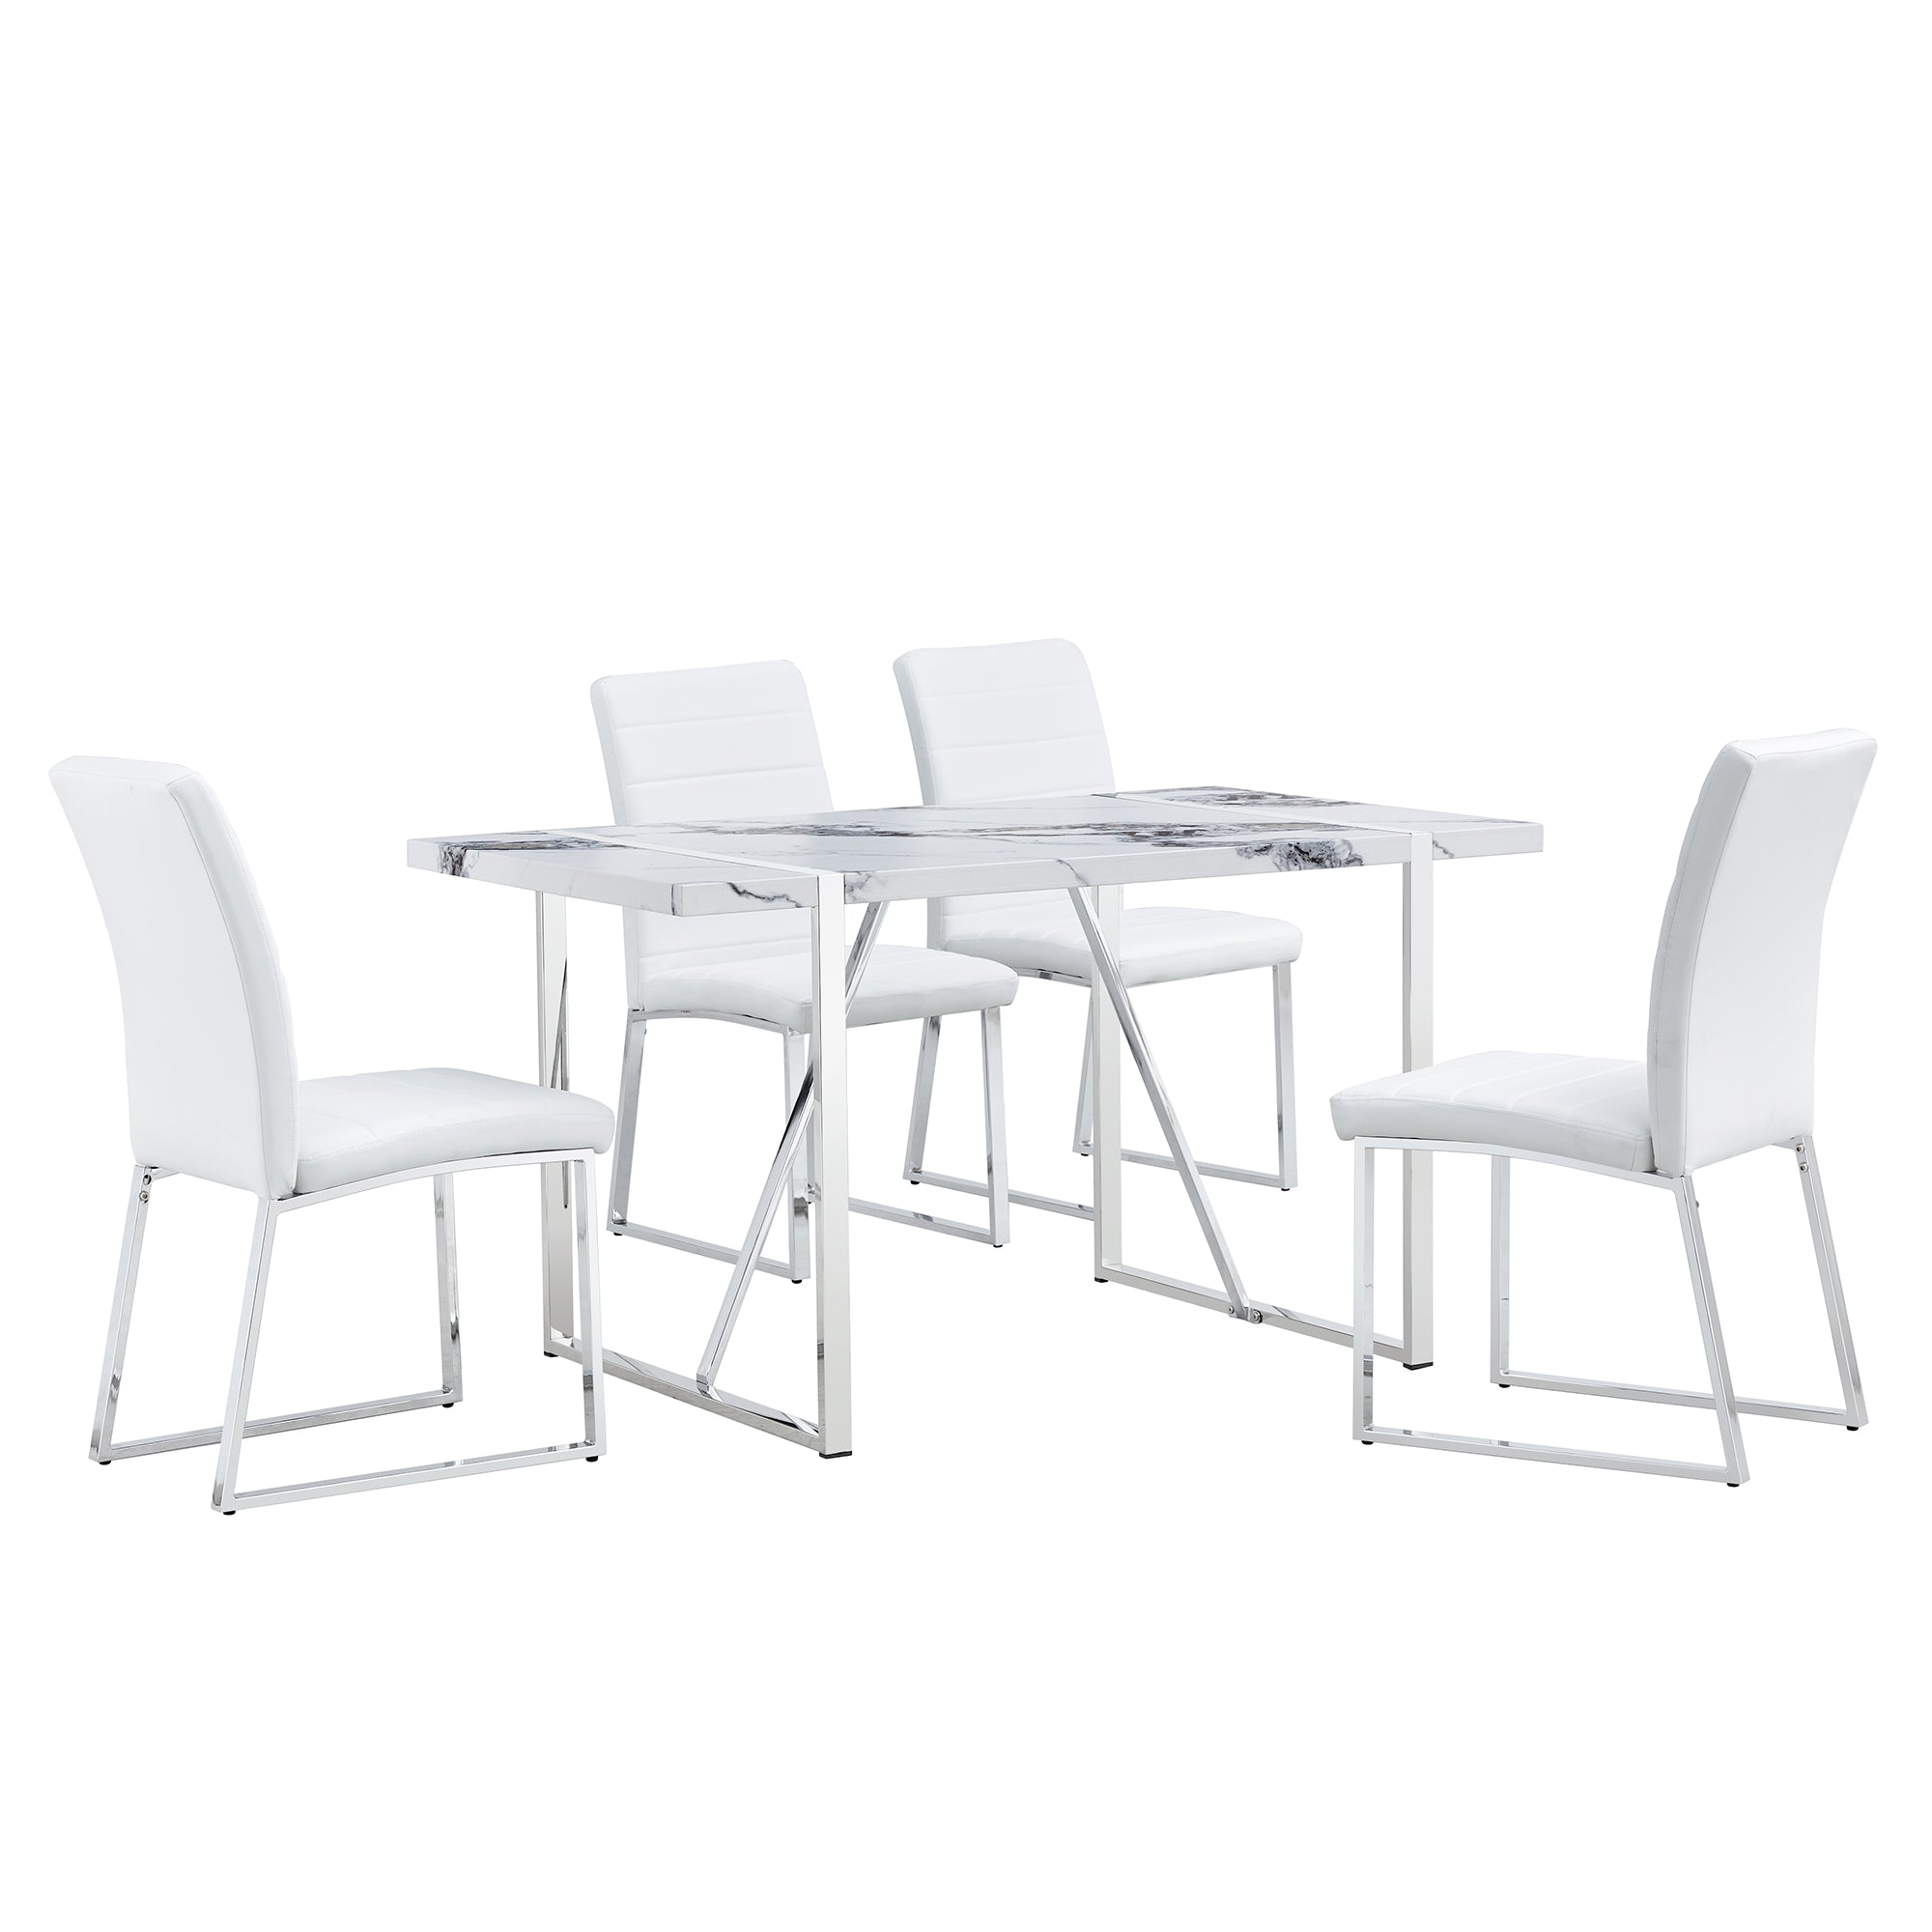 Bellemave 55" 5-piece Dining Table Chairs Set，Faux Marble Modern Dining Table and Faux Leather Chairs